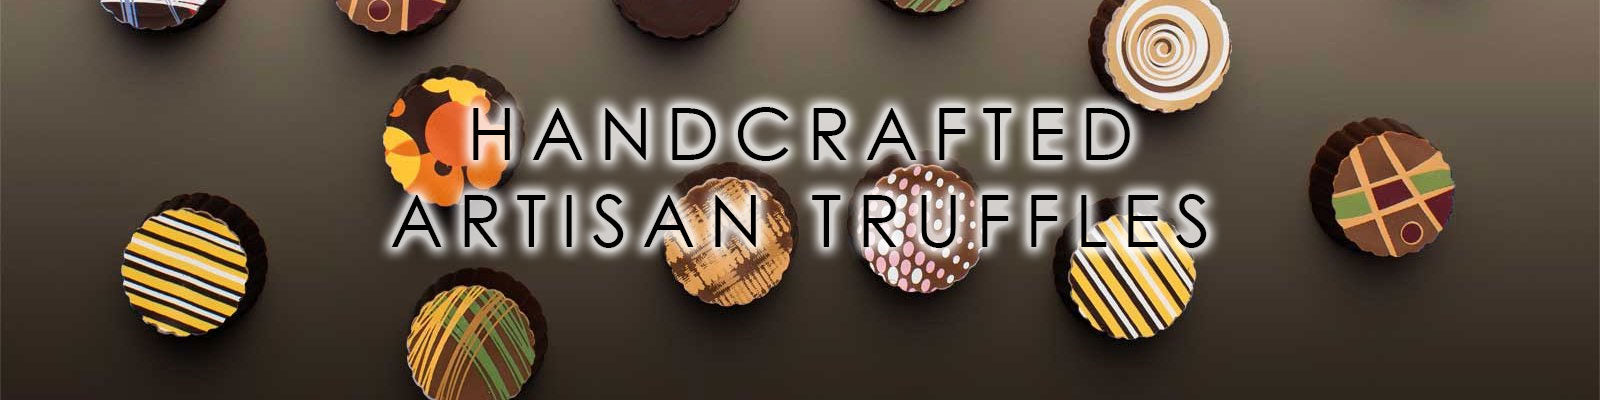 Handcrafted Artisan Truffles Build Your Own 15 piece box